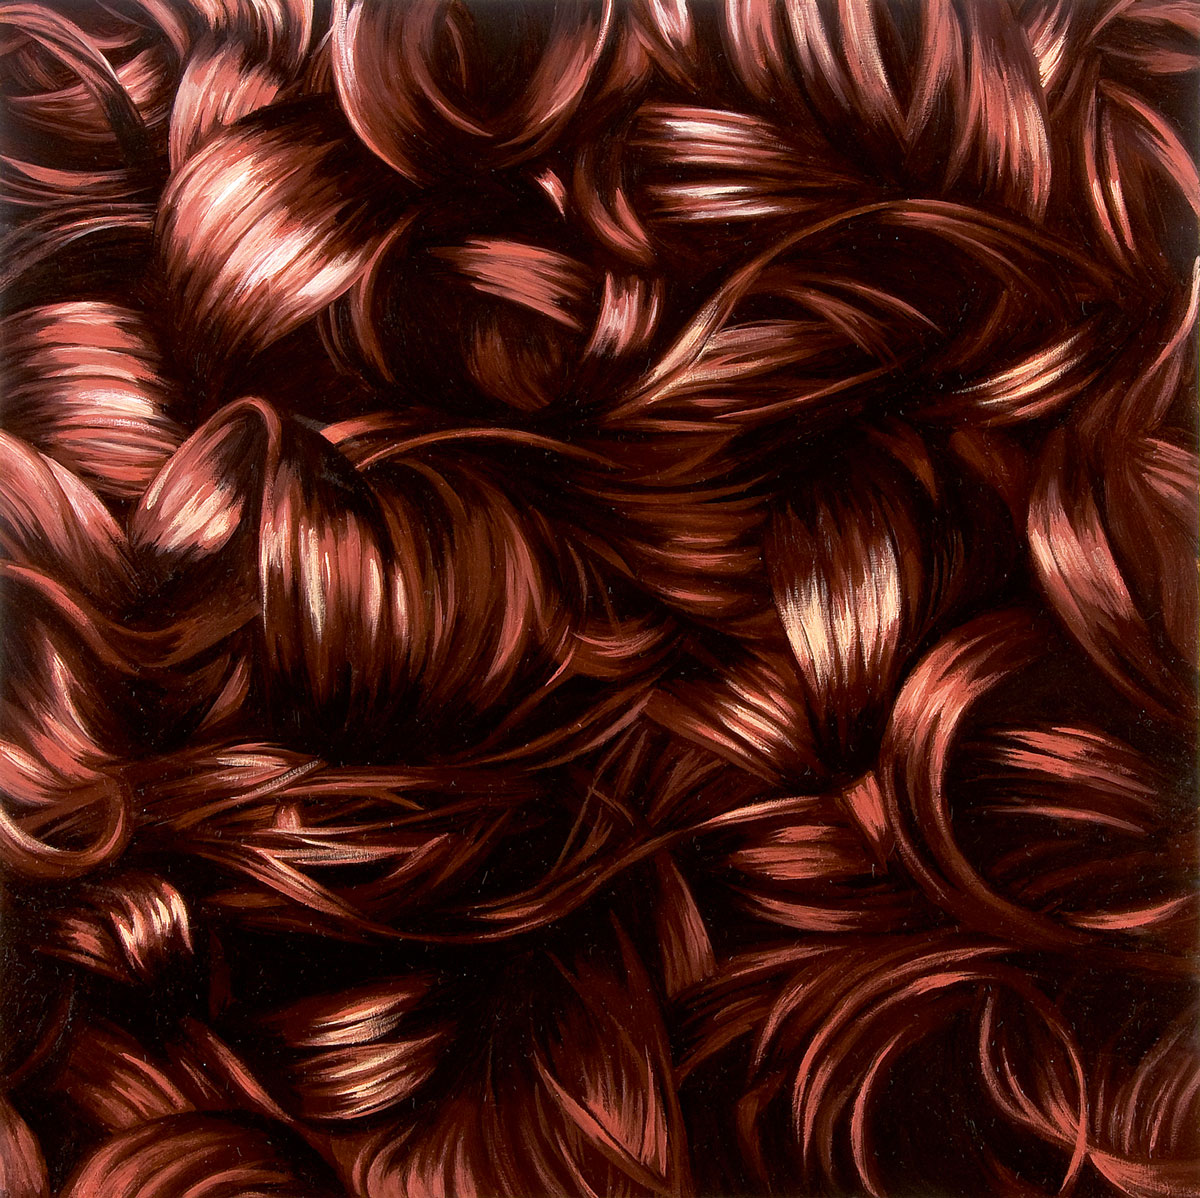 Artist Julia Jacquette’s two thousand and nine painting of hair titled “Brunette, Curls 2.”